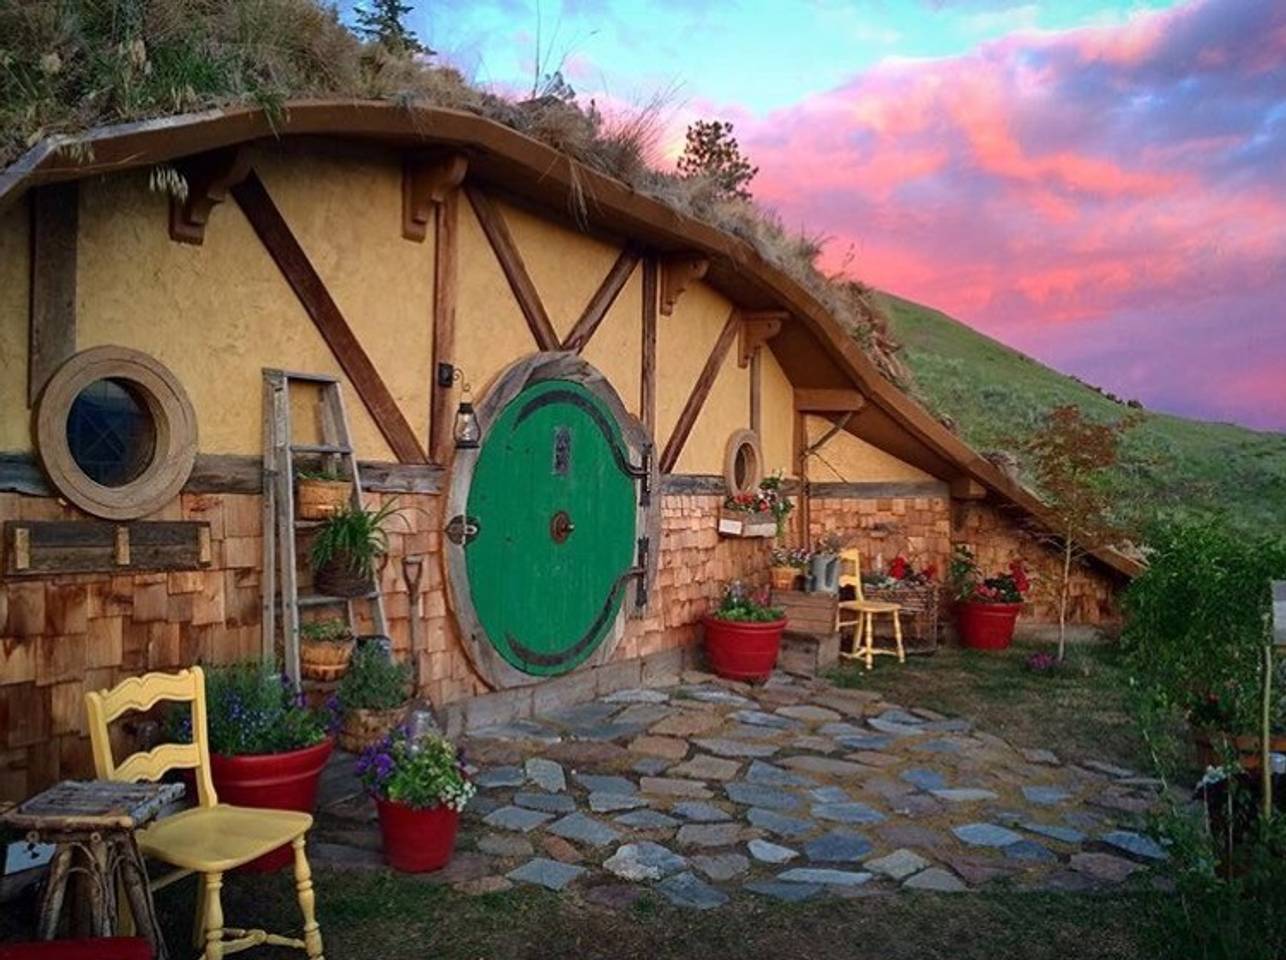 Coolest Airbnbs - Hobbit House